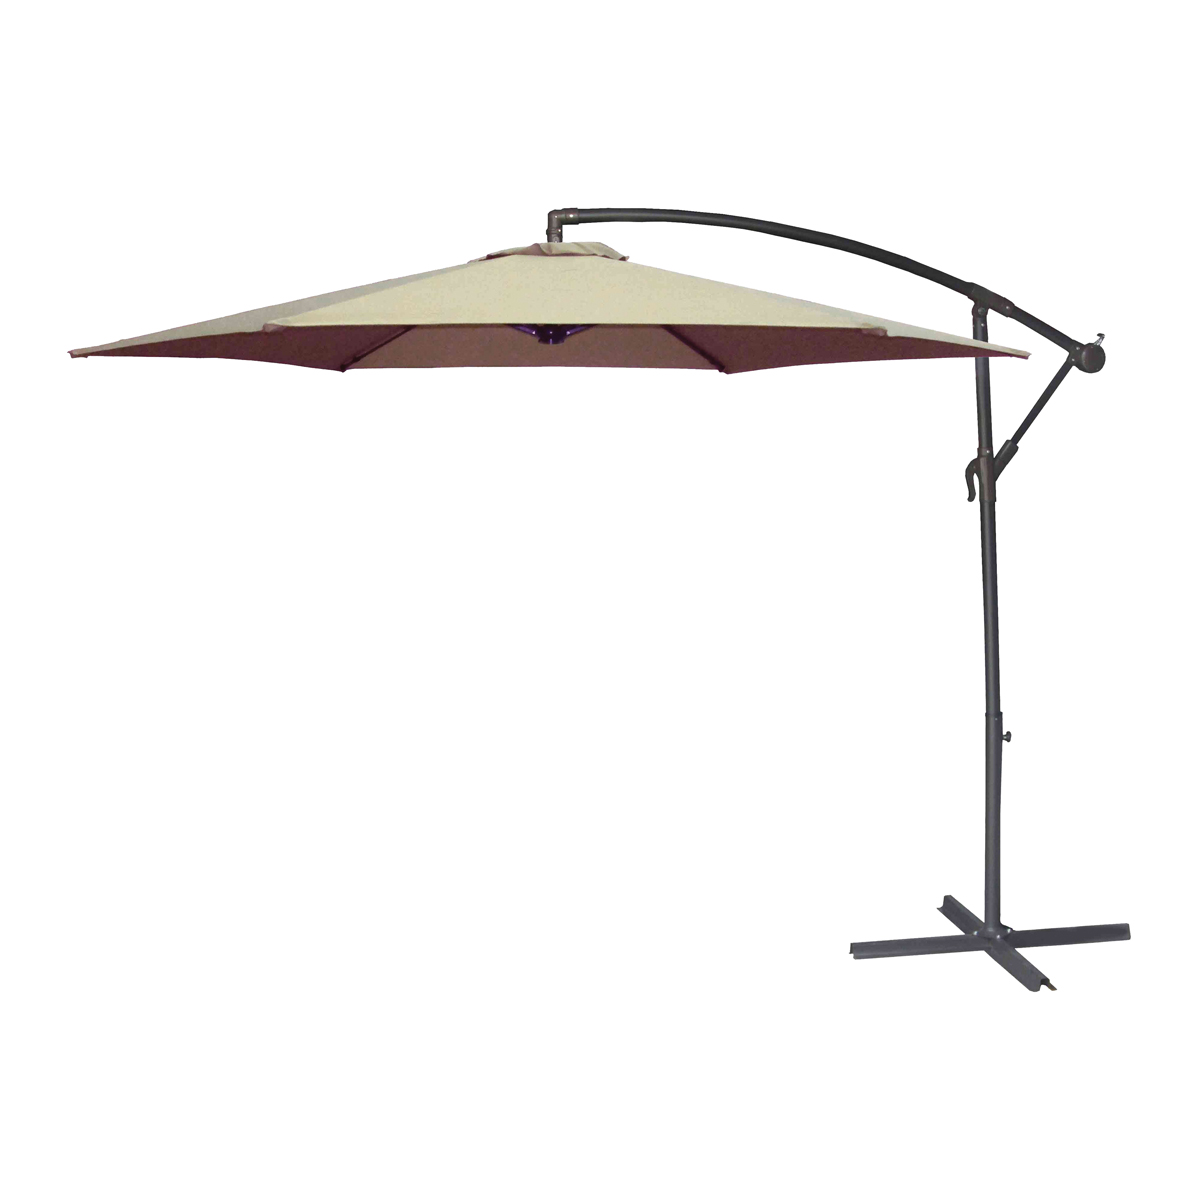 UMSC10BKOBD-04 Solar Offset Taupe Umbrella, 98.42 in OAH, 10 ft W Canopy, 10 ft L Canopy